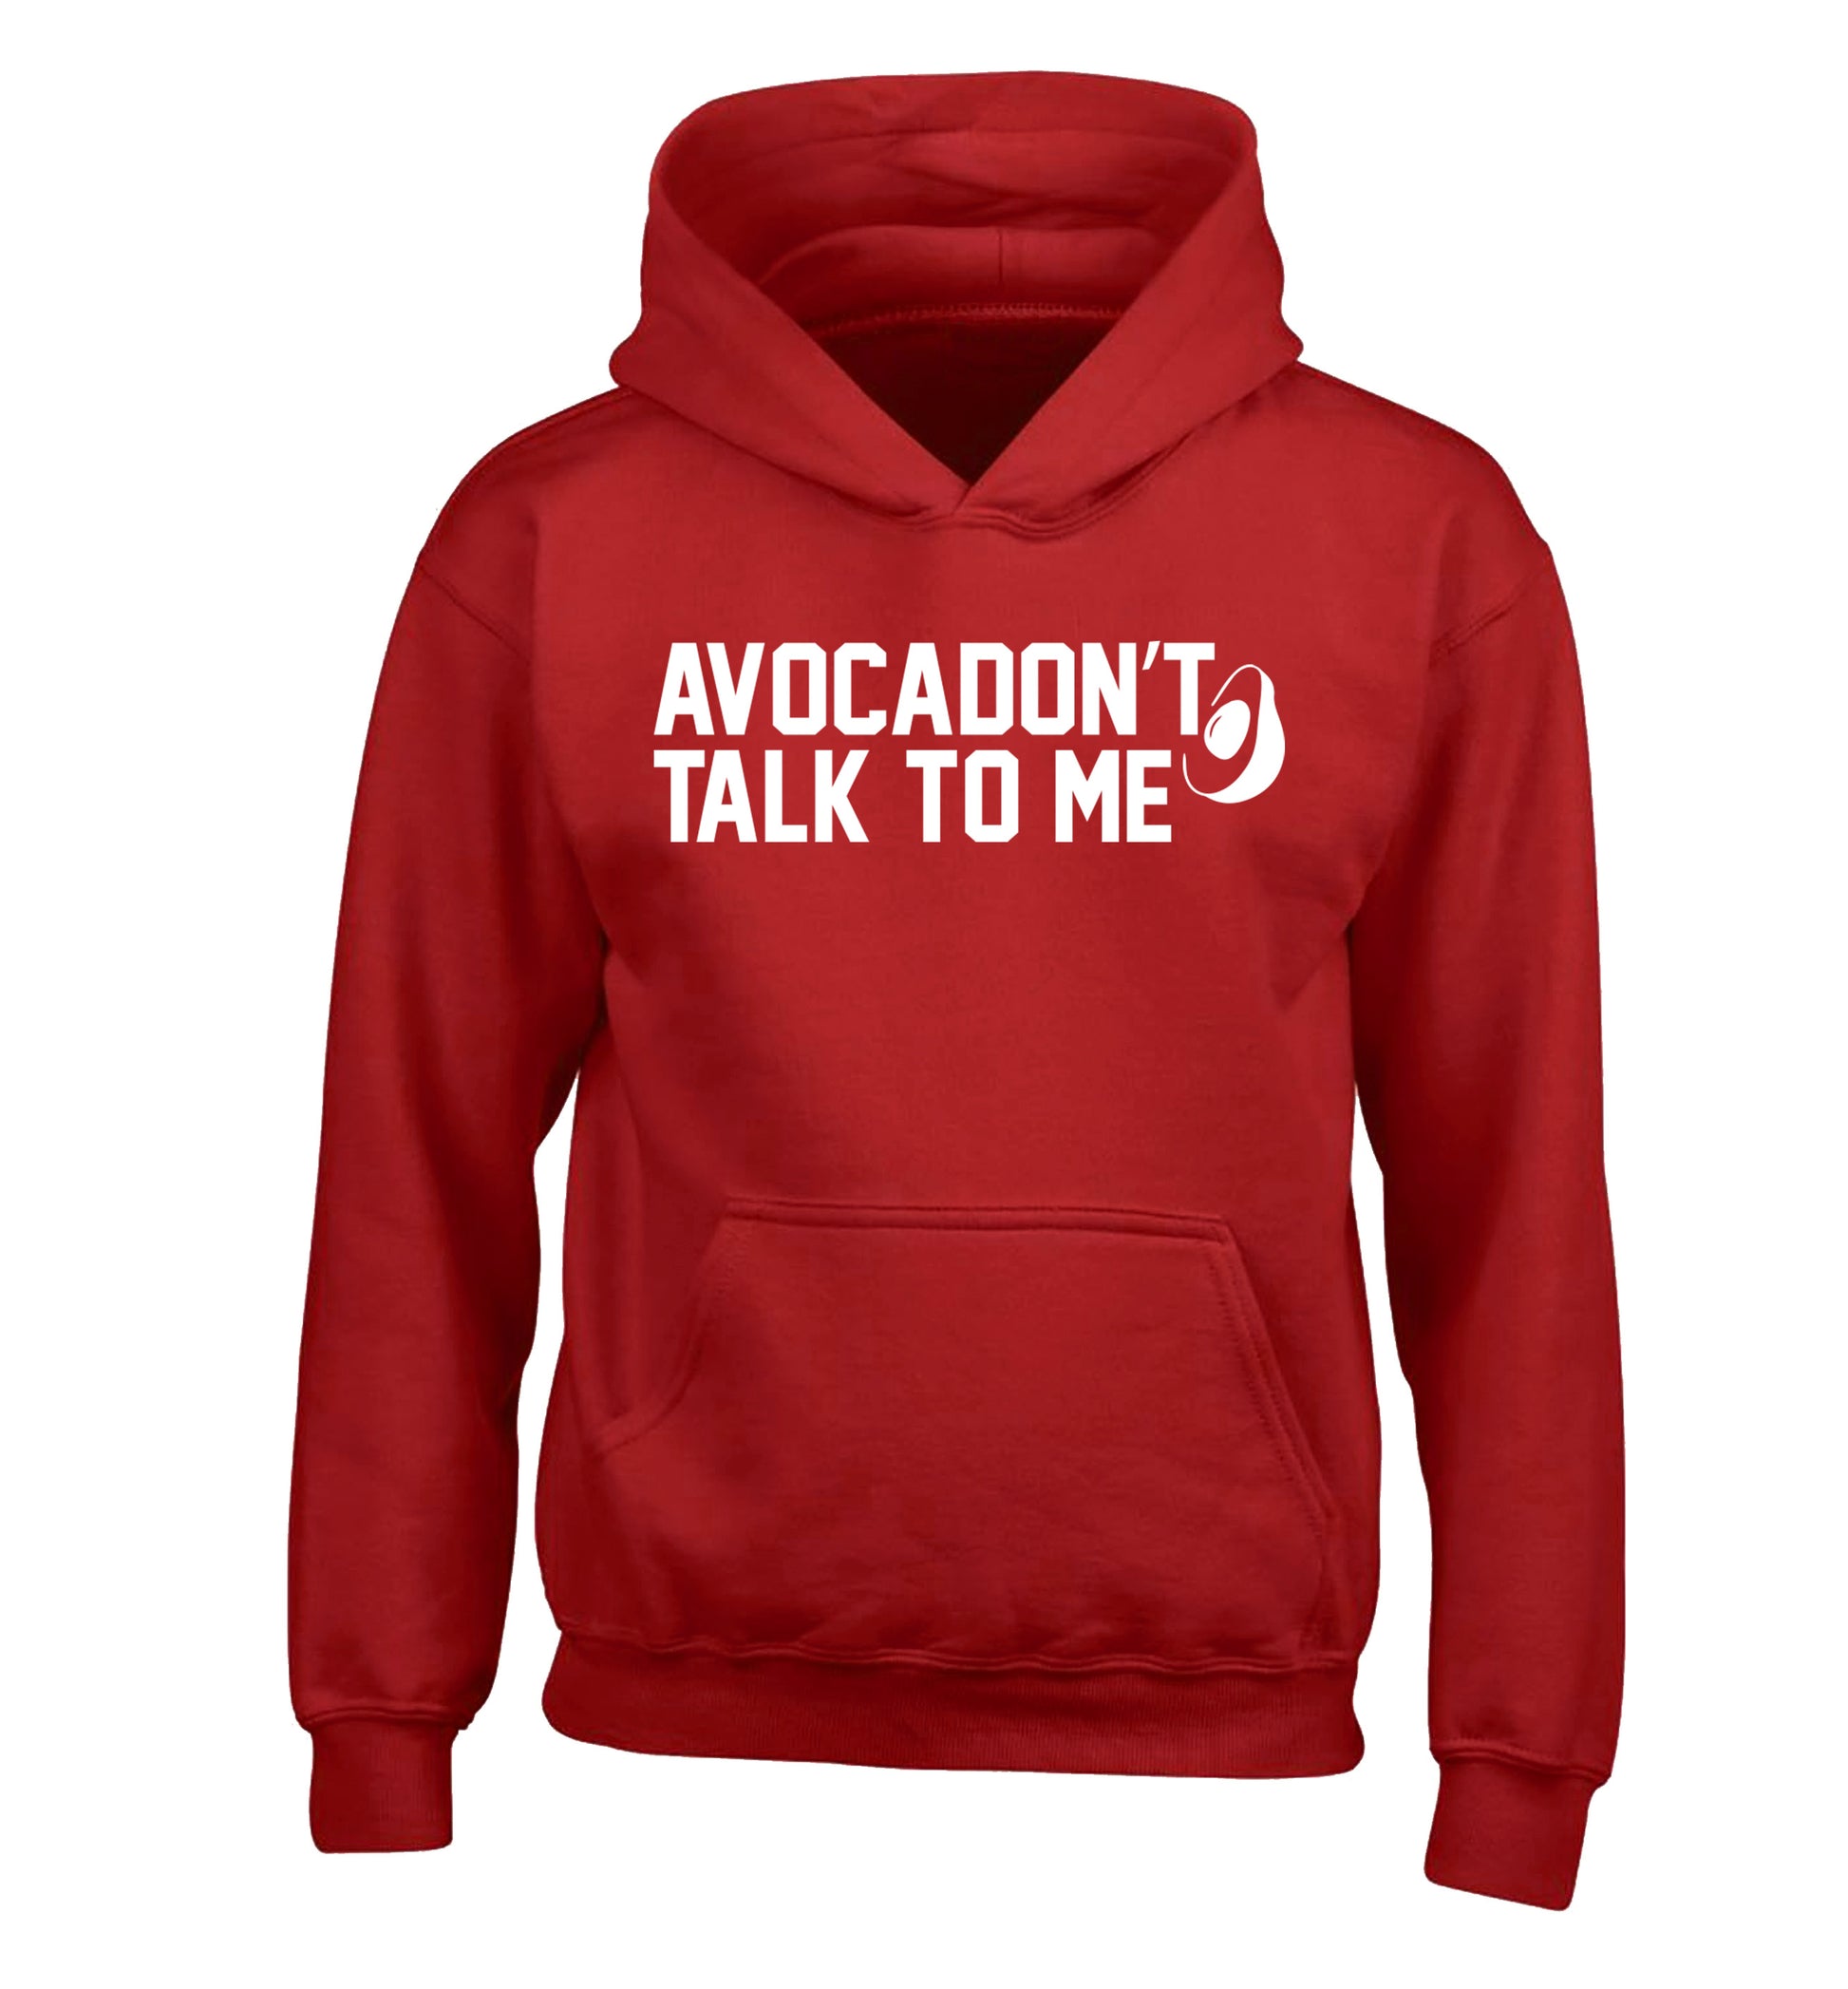 Avocadon't talk to me children's red hoodie 12-14 Years